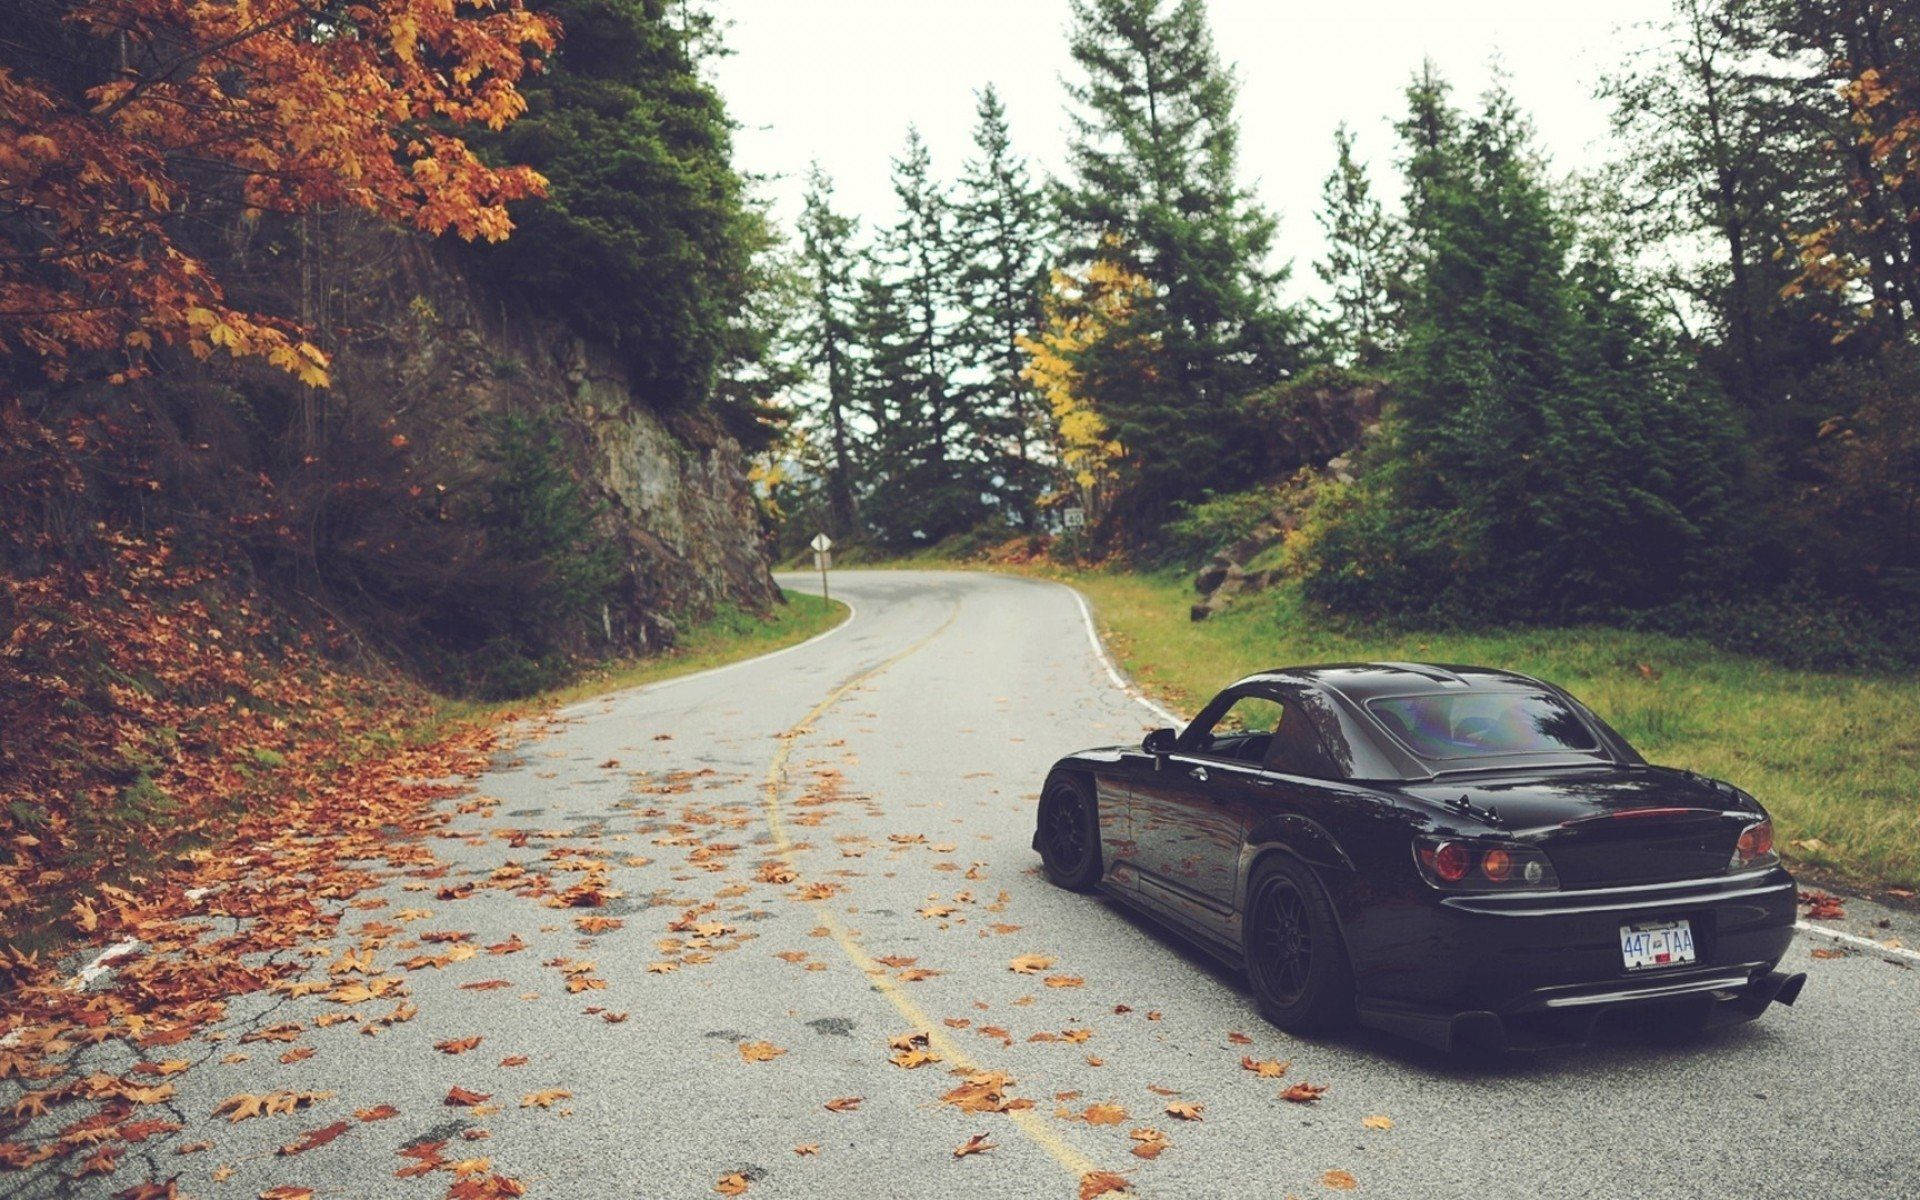 Black Jdm Car On Country Road Background